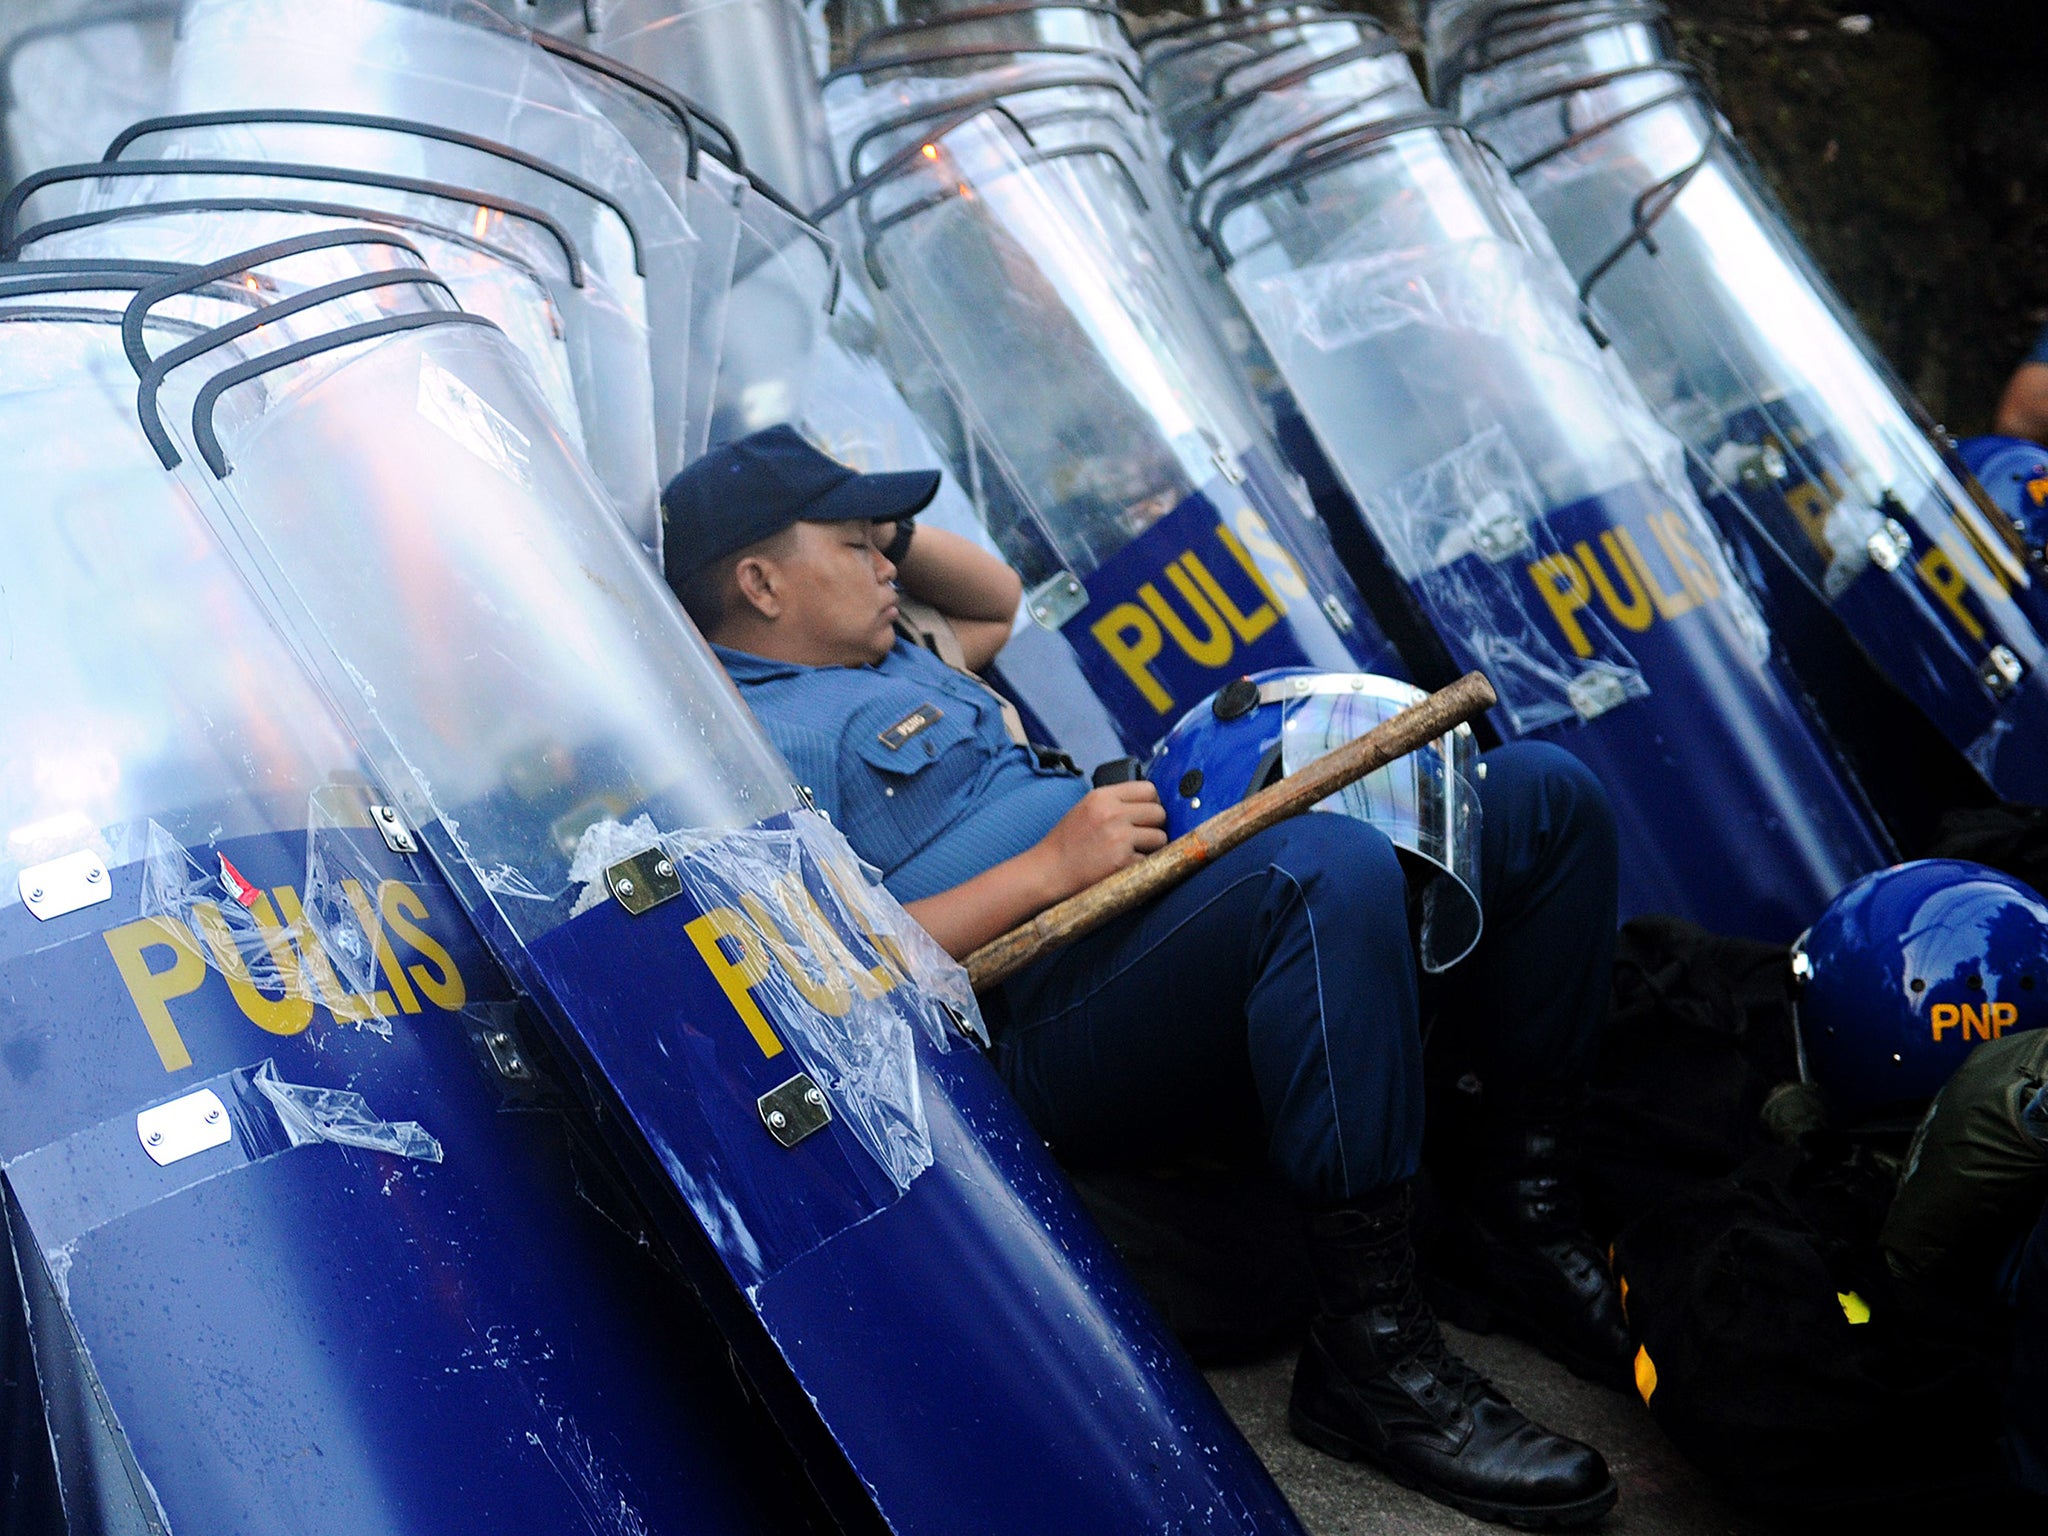 A policeman rests on riot shields before his deployment to block protesters marching towards the parliament in suburban Manila, hours before President Benigno Aquino delivers his final annual address to parliament. Aquino is expected to report on his six-year term as well as sketch a roadmap for his successor to be elected in the May 2016 elections